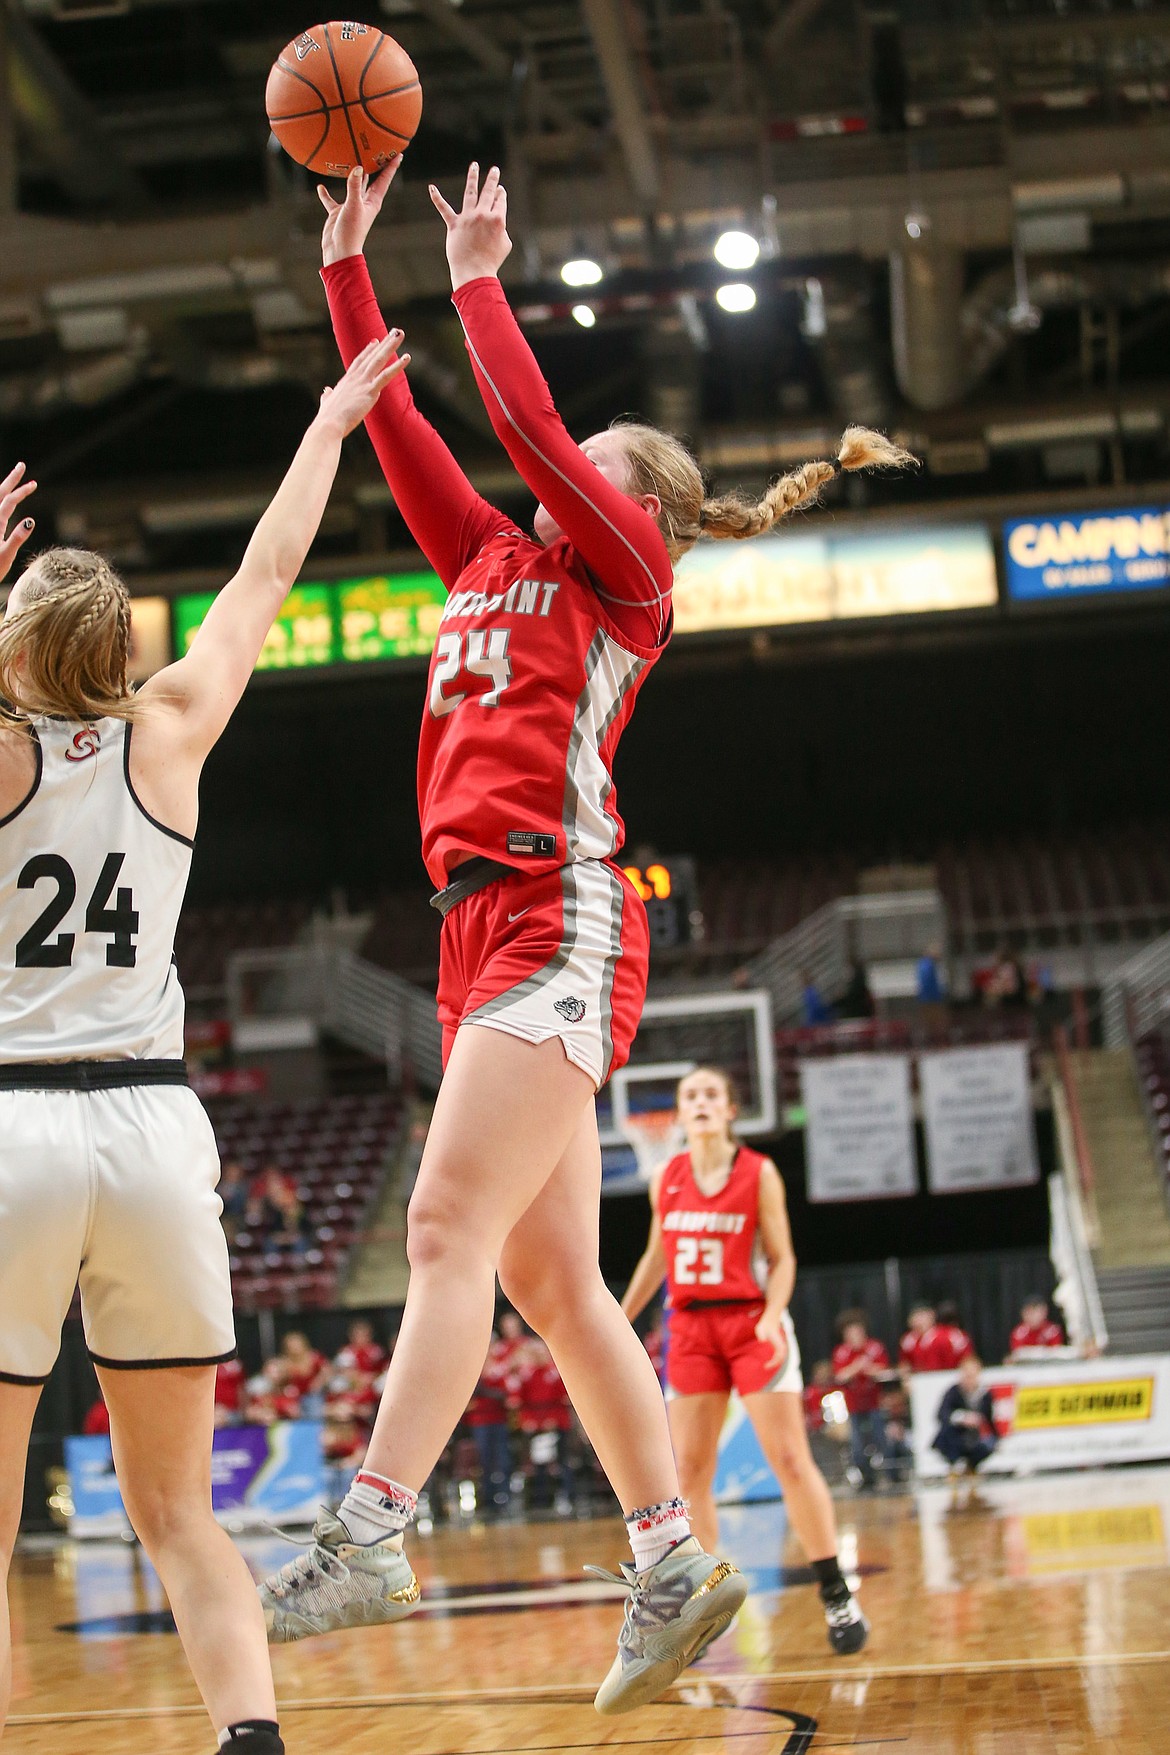 Karlie Banks of Sandpoint puts up a shot against Shelley in the championship game of the state 4A girls basketball tournament Saturday at the Ford Idaho Center in Nampa.